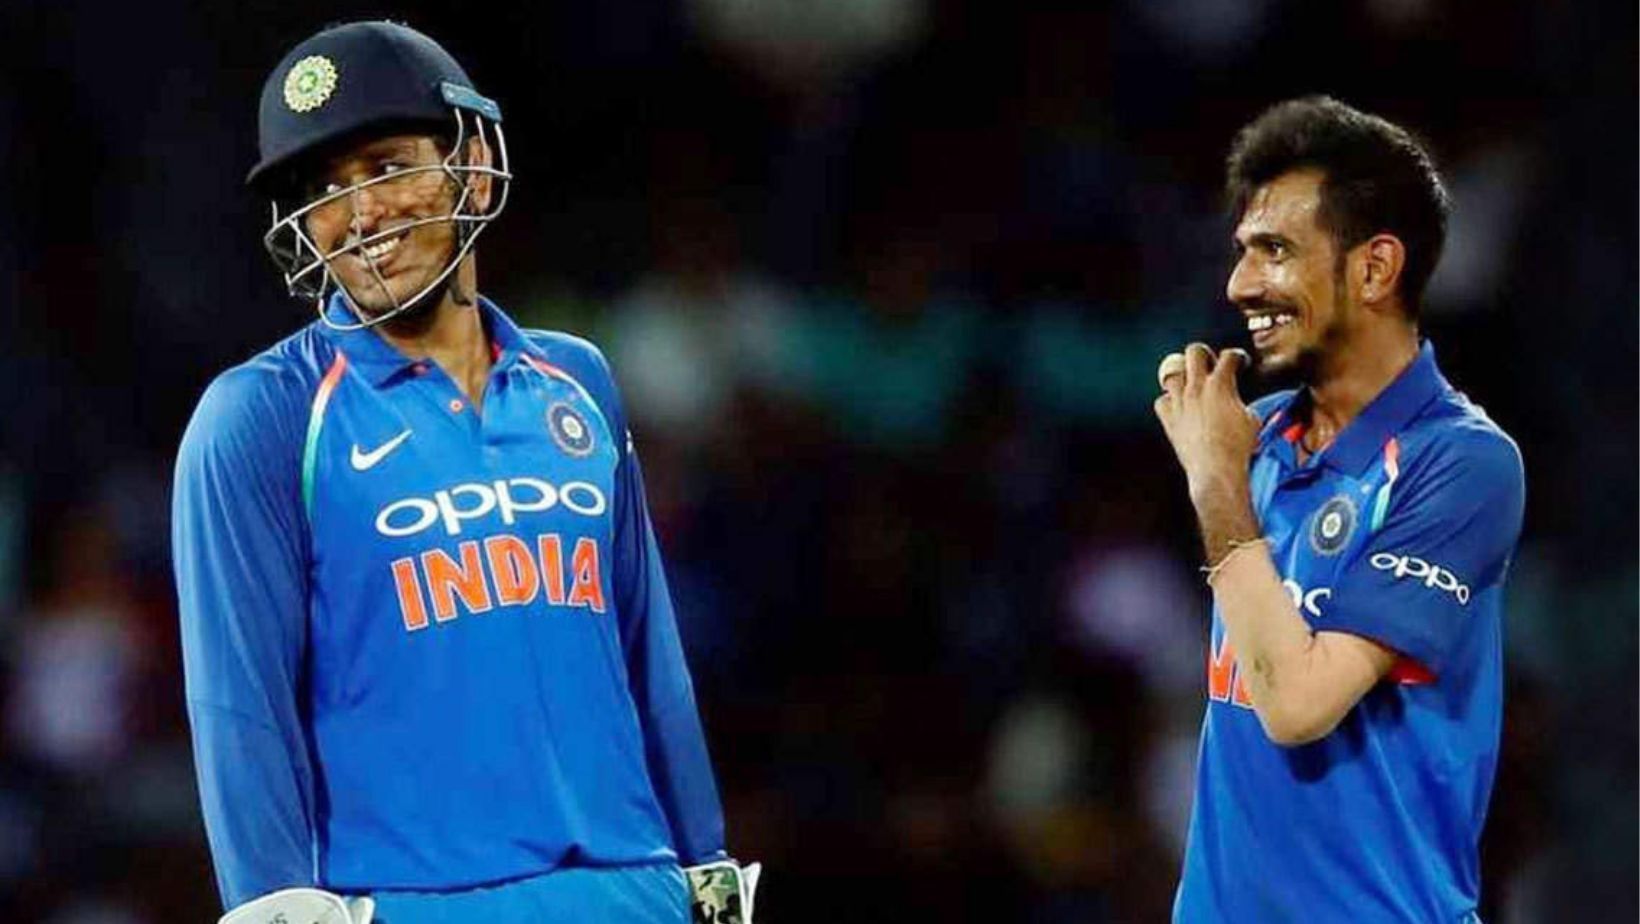 MS Dhoni and Yuzvendra Chahal shared a special bond on and off the field.